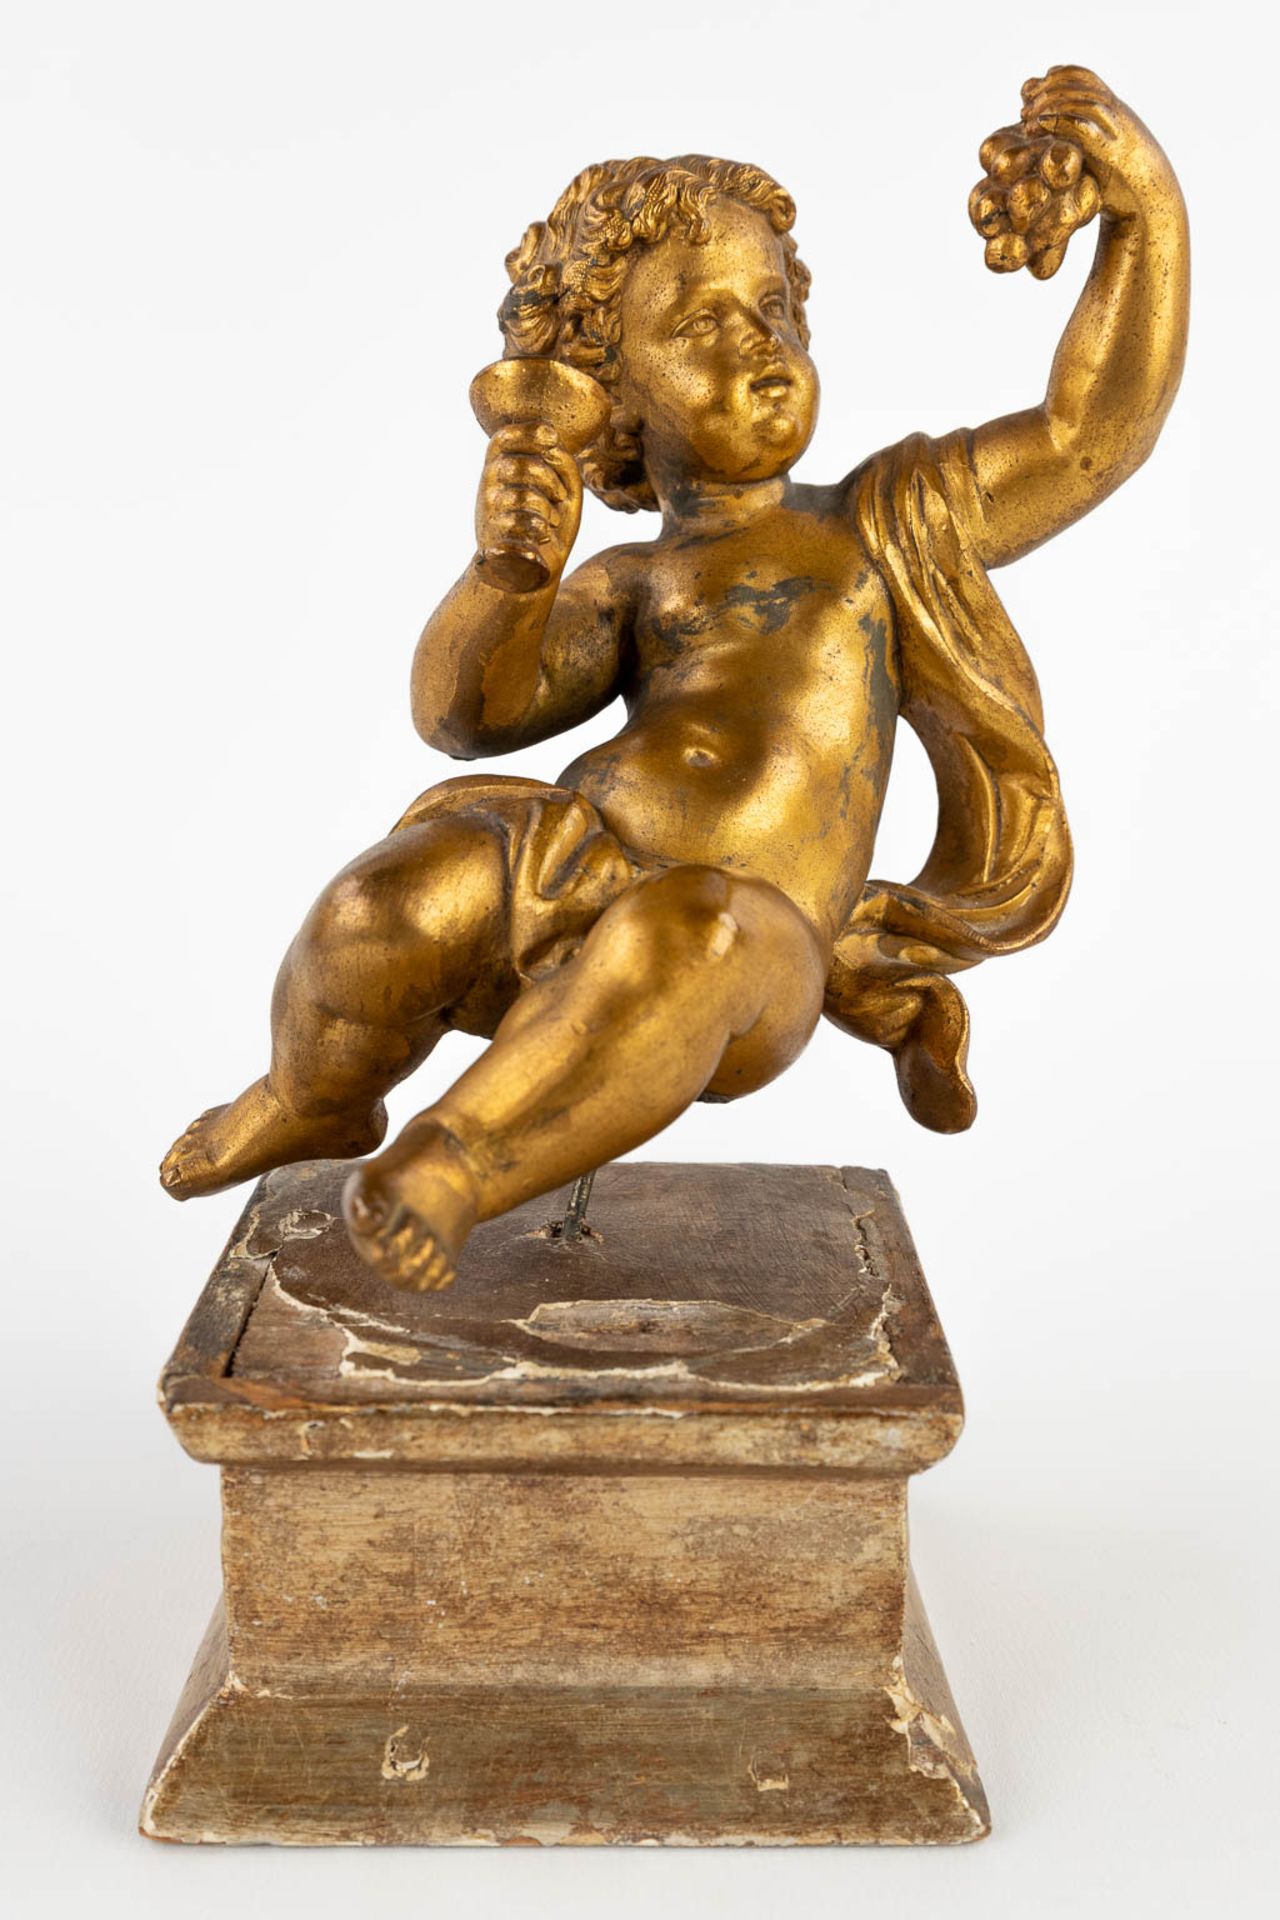 A pair of angels, gilt spelter and mounted on a wood base. 19th C. (W:12 x H:18 cm) - Image 7 of 14